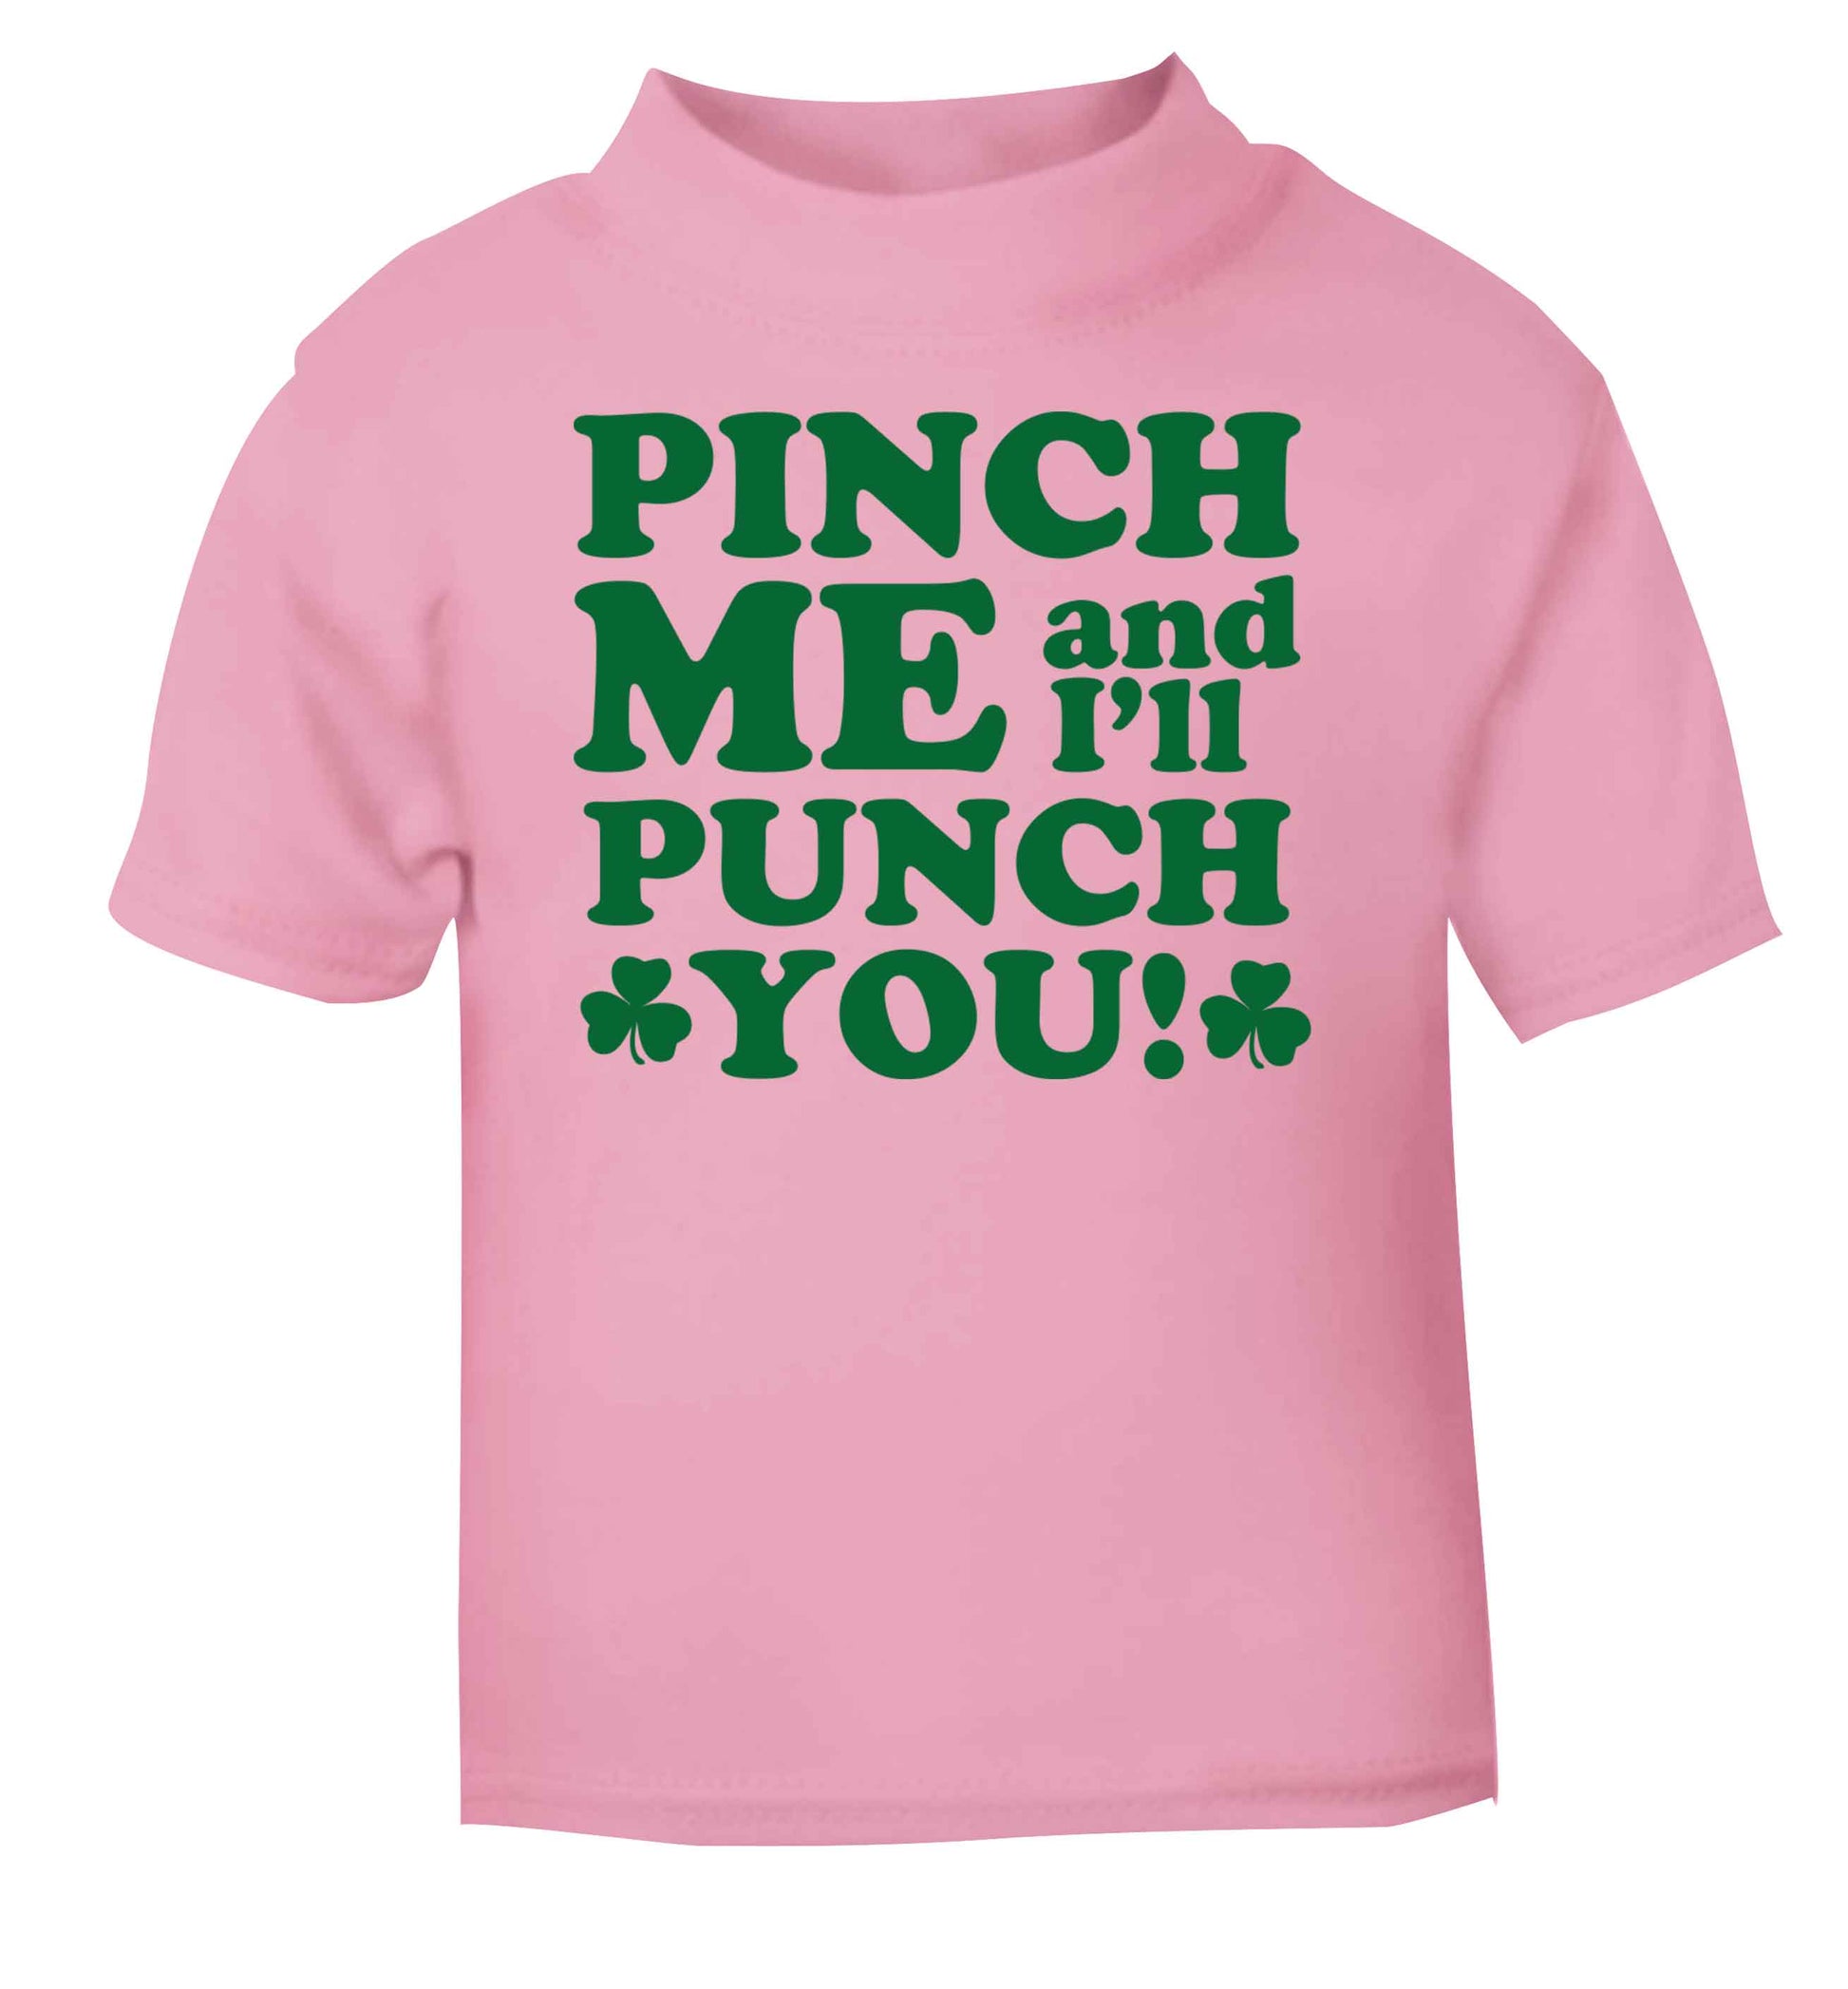 Pinch me and I'll punch you light pink baby toddler Tshirt 2 Years